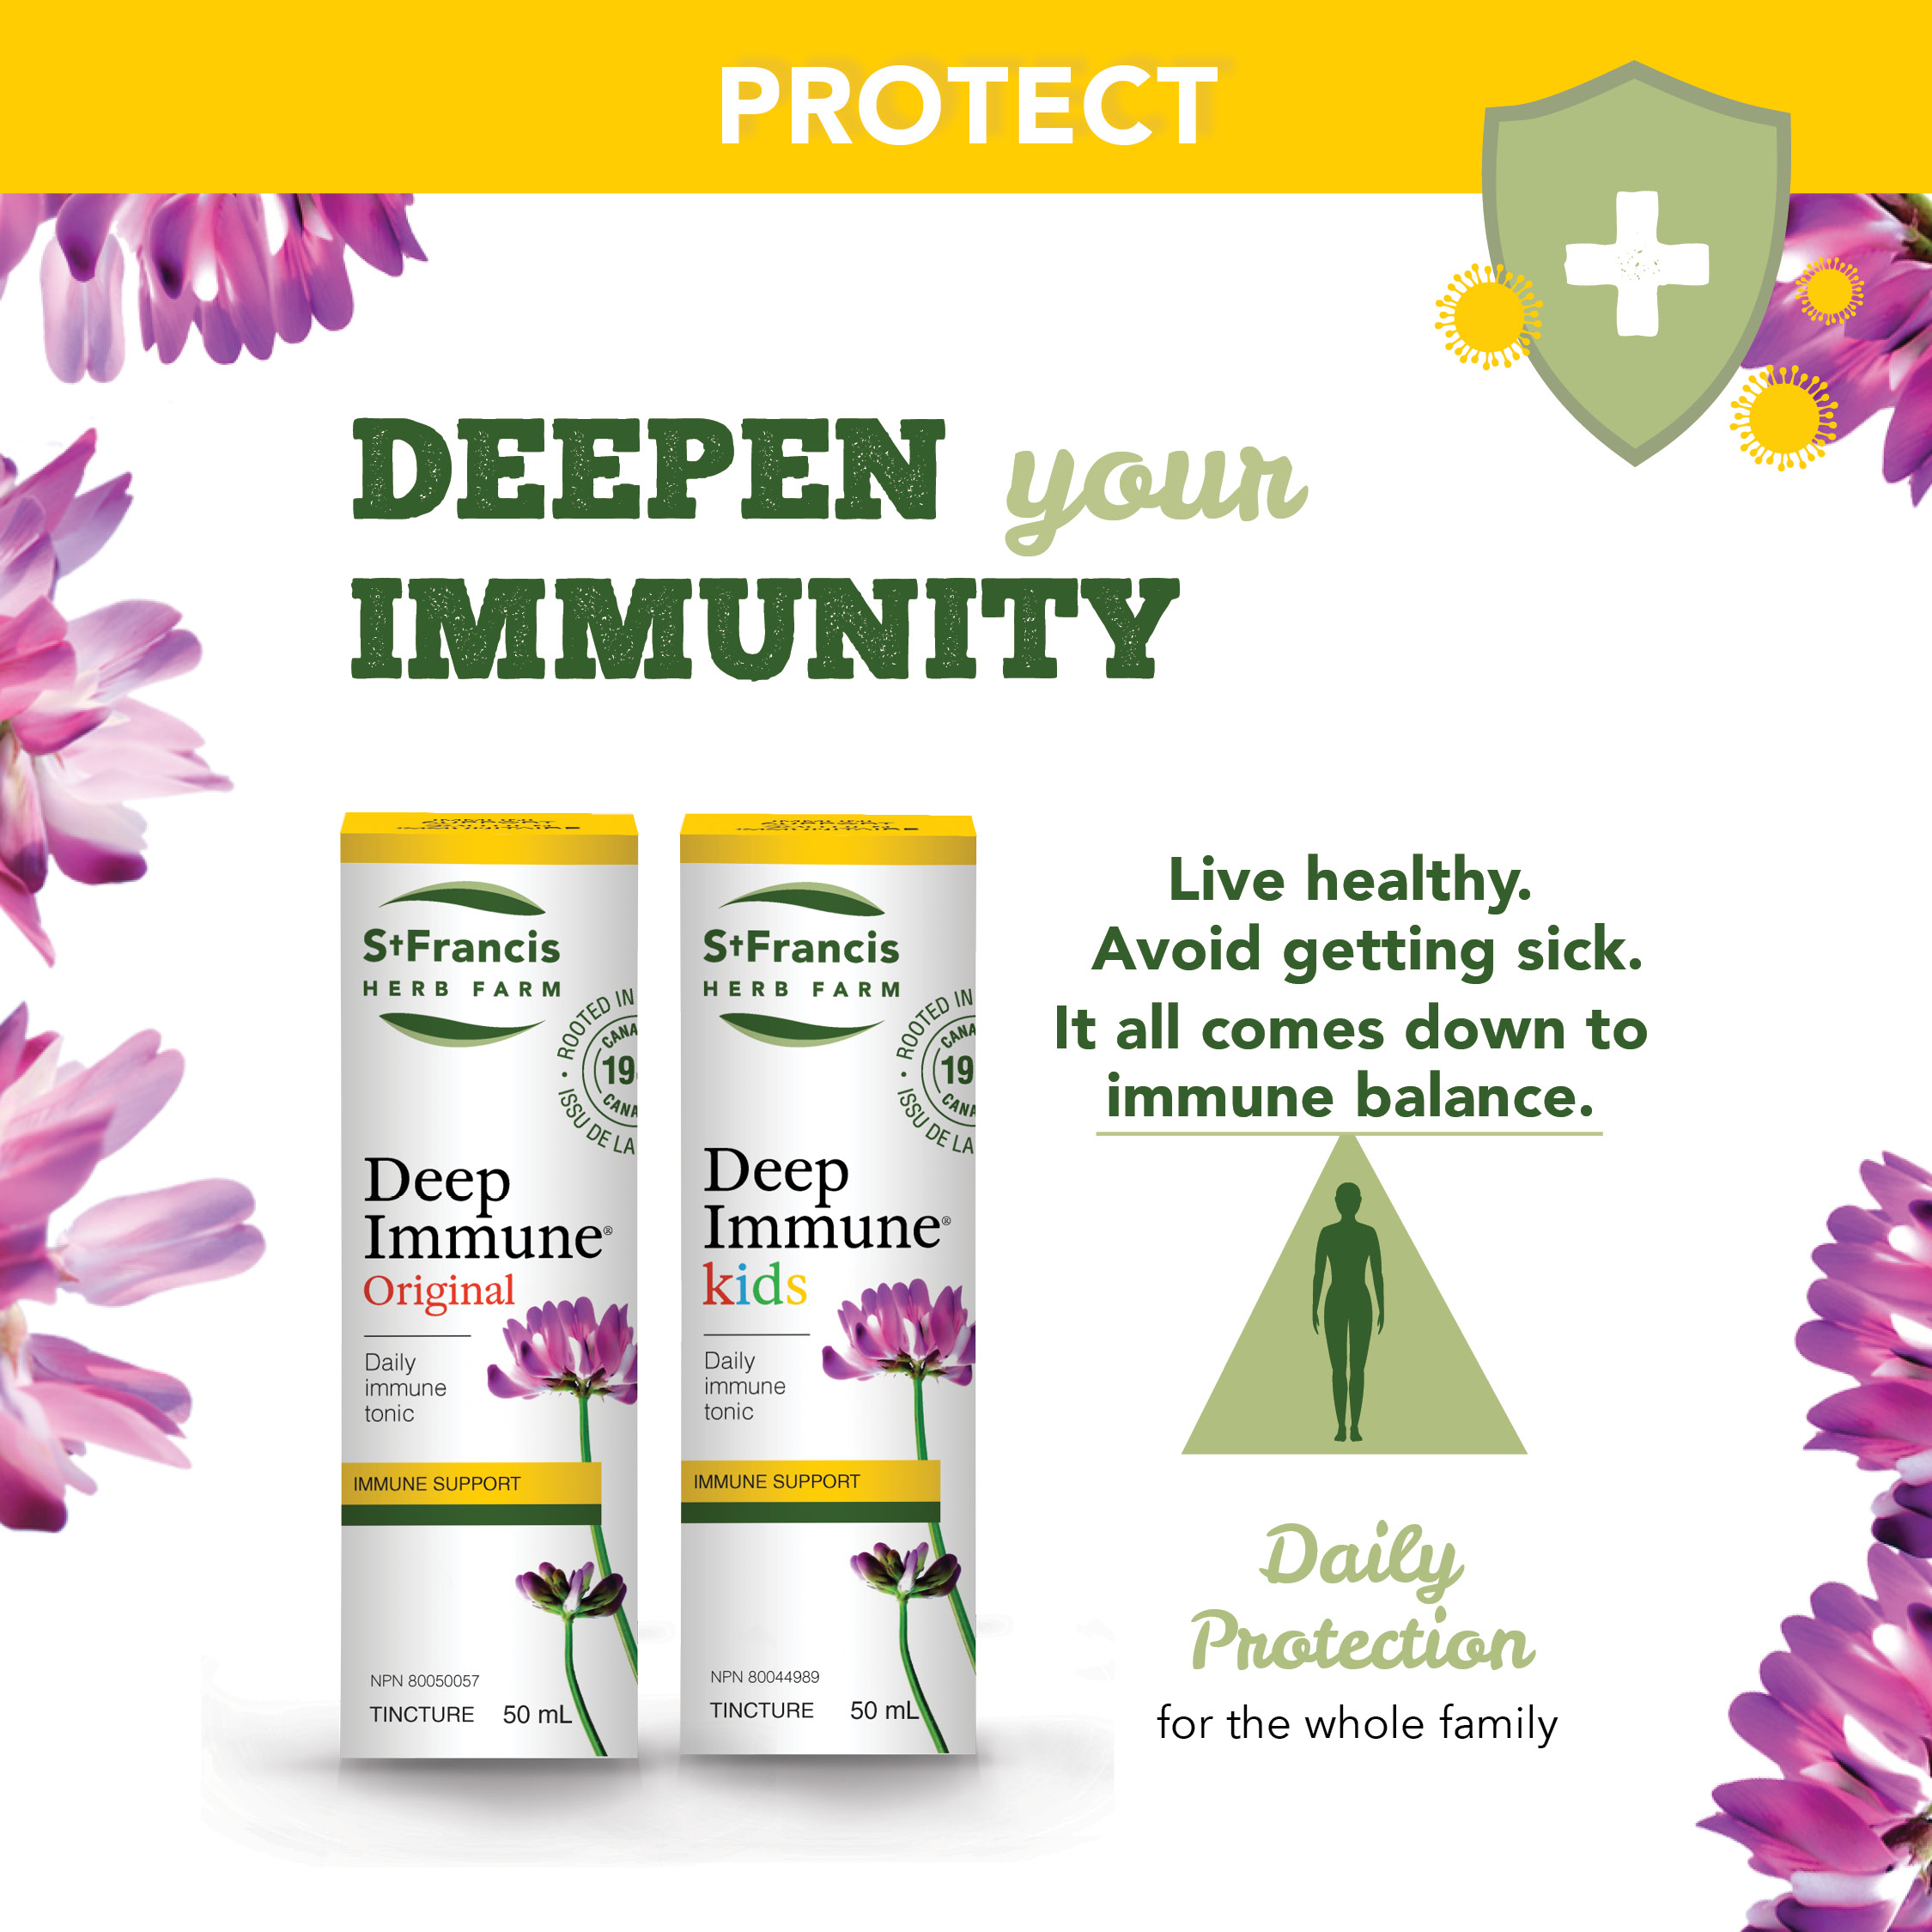 Protect: Deepen your Immunity